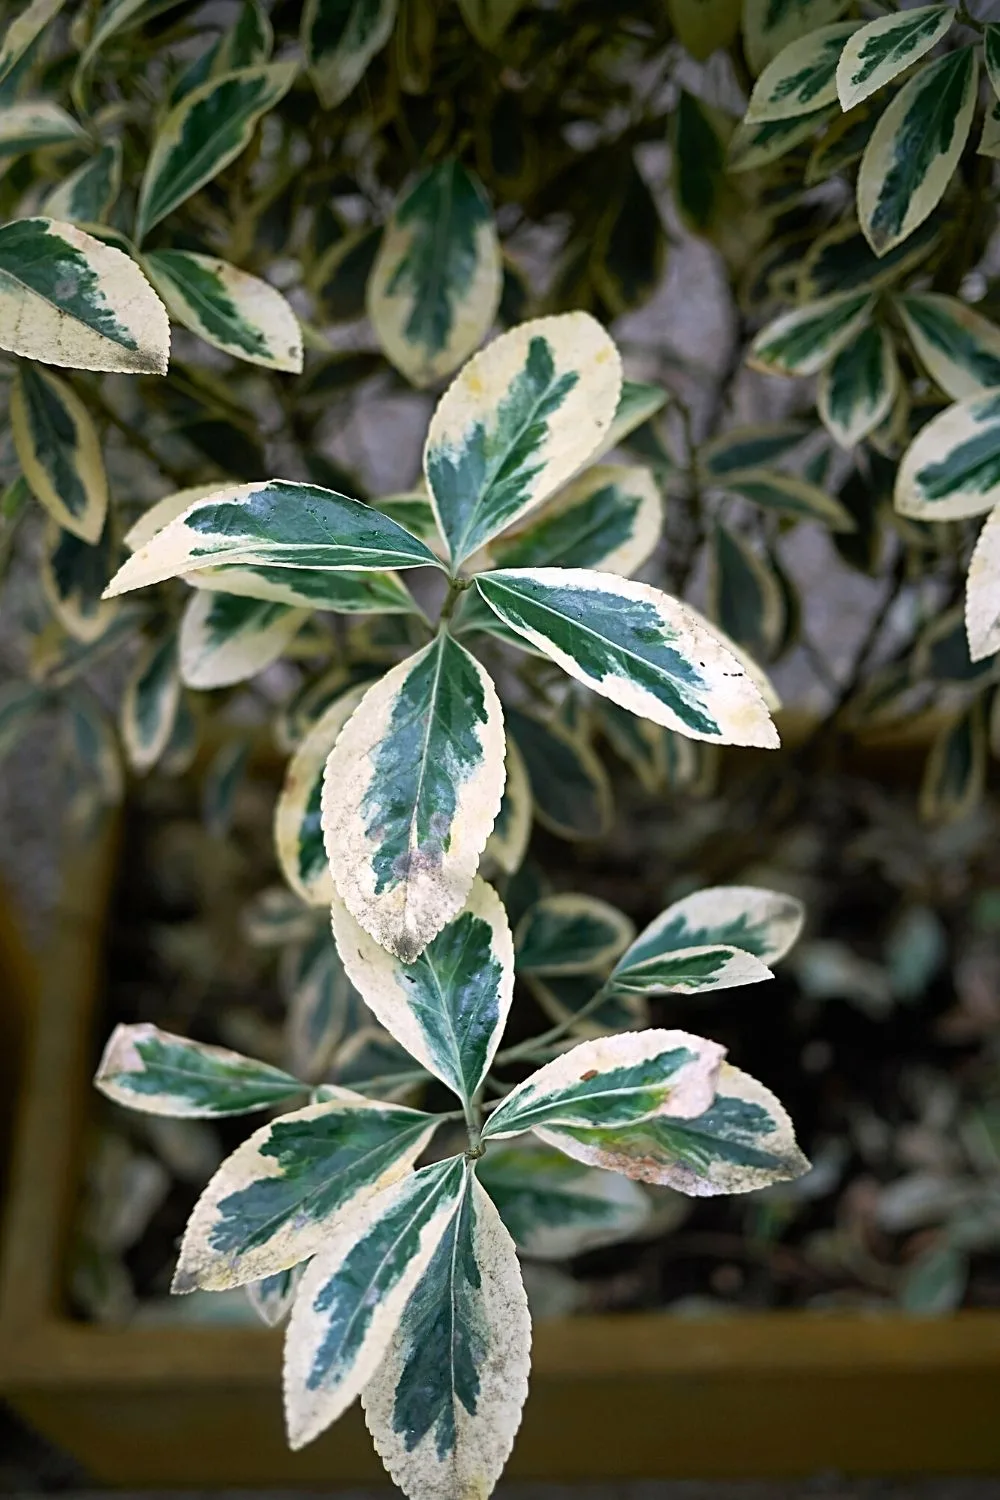 Euonymus Fortunei is a greenish, small white flower you can grow in the north-facing side of the house